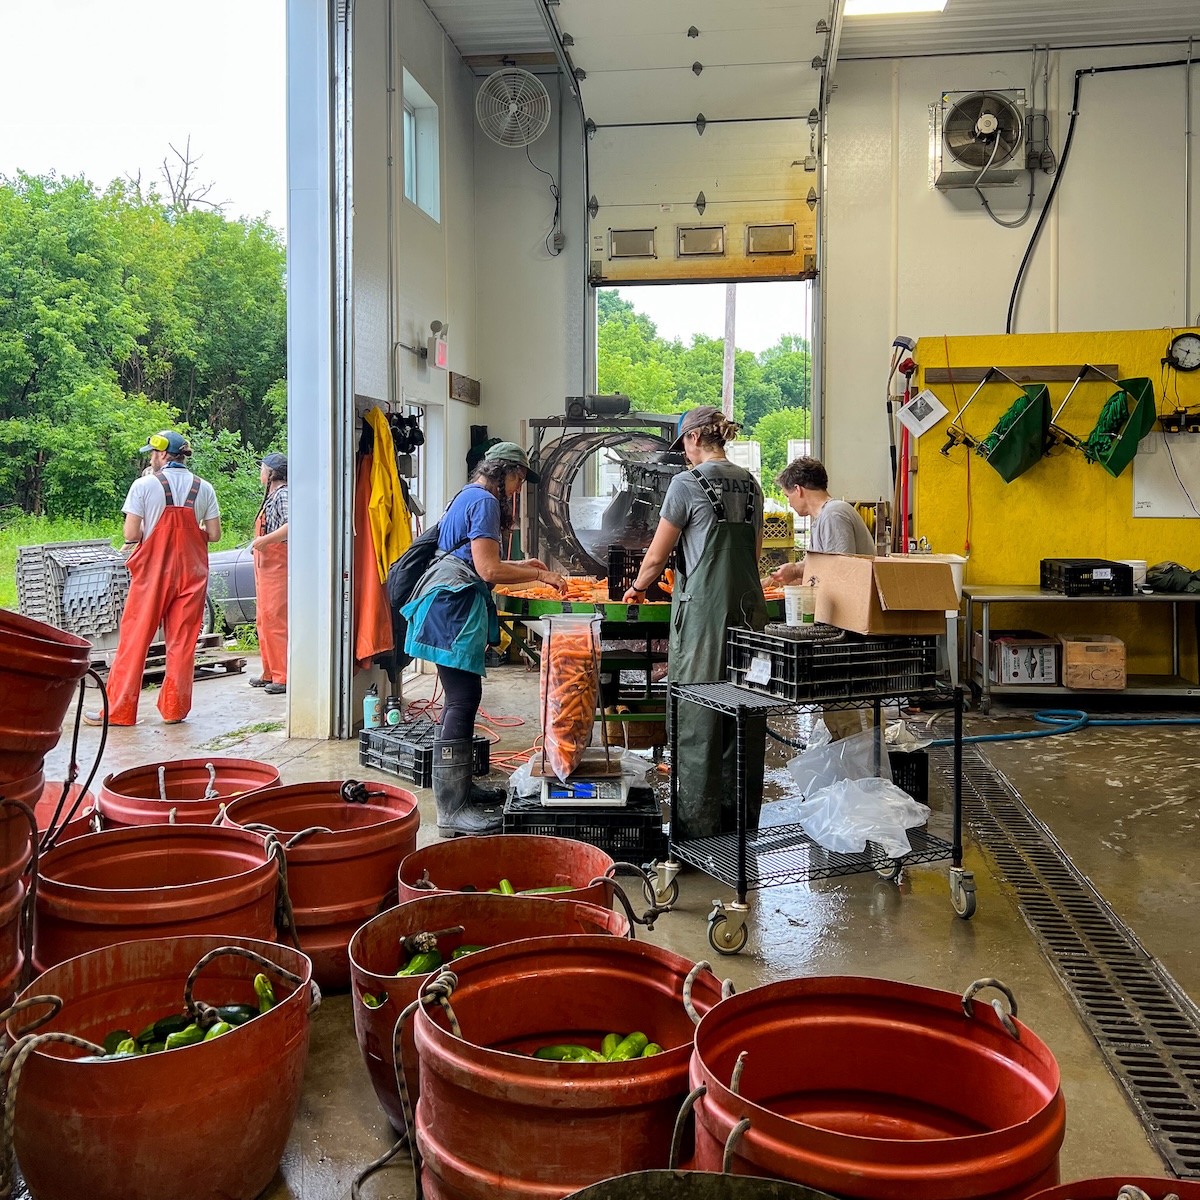 People wash vegetables in an open air building